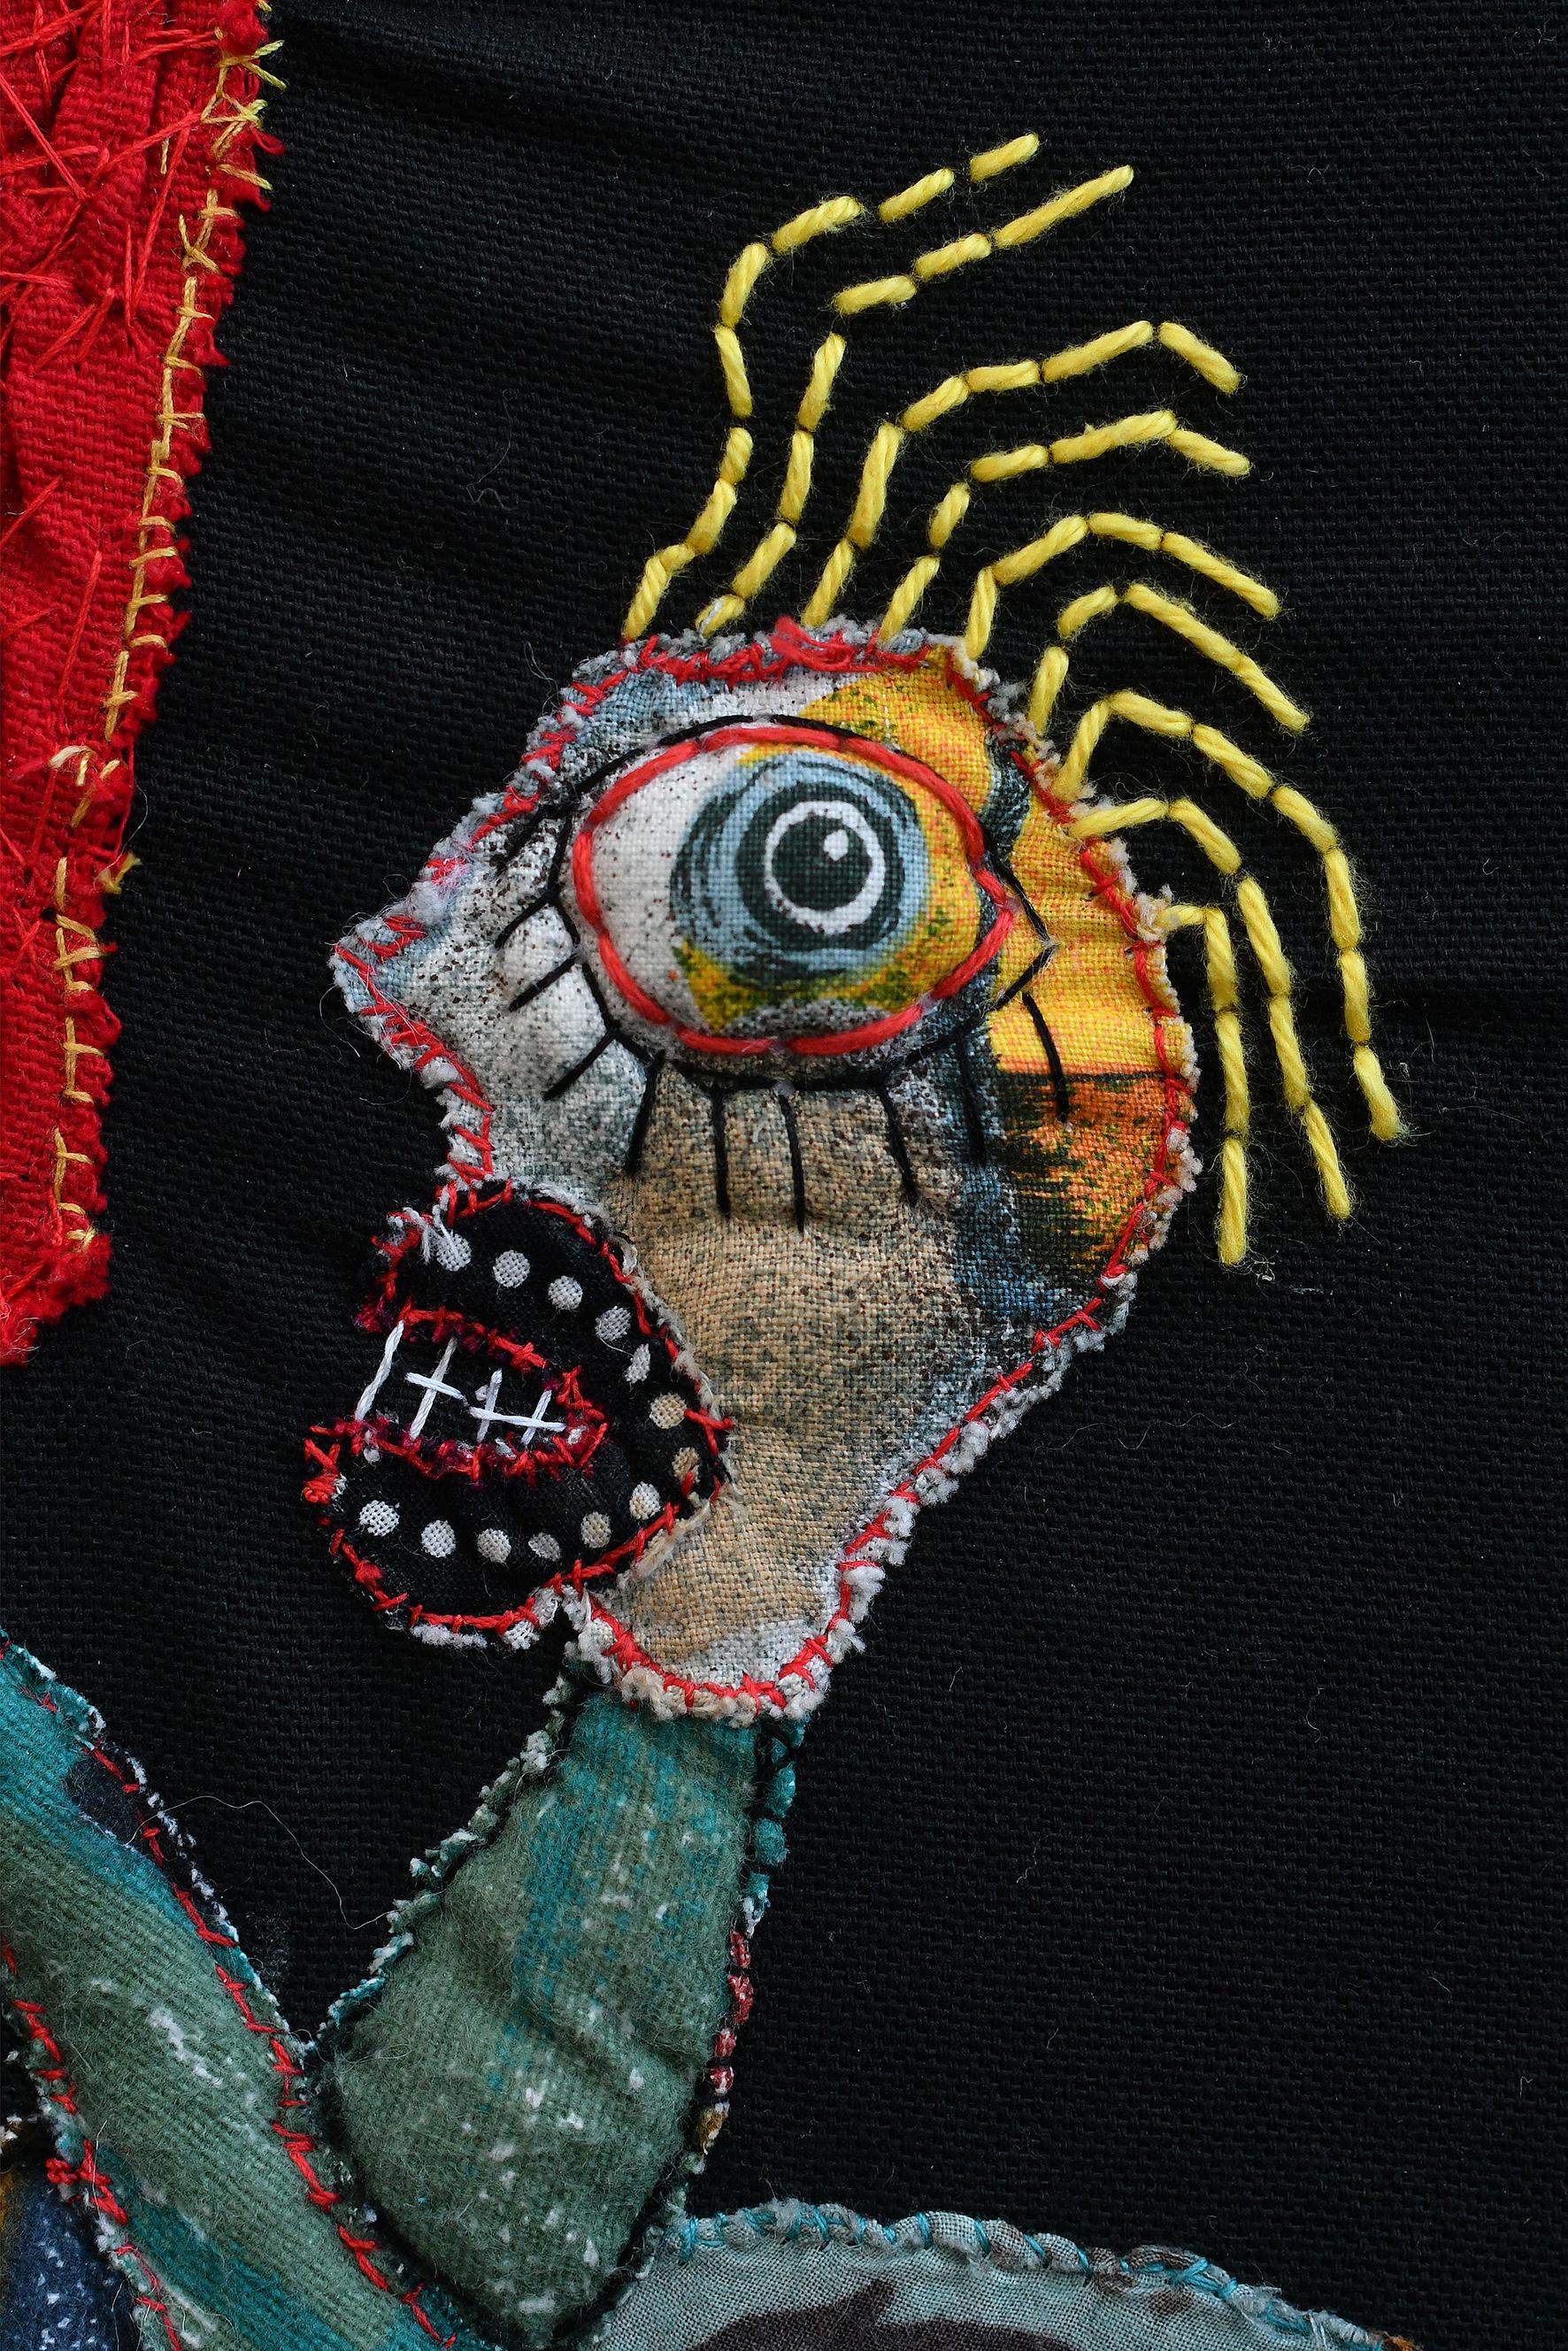 Créatures of the mined lands Barbara d'Antuono 21st Century textile outsider art en vente 3